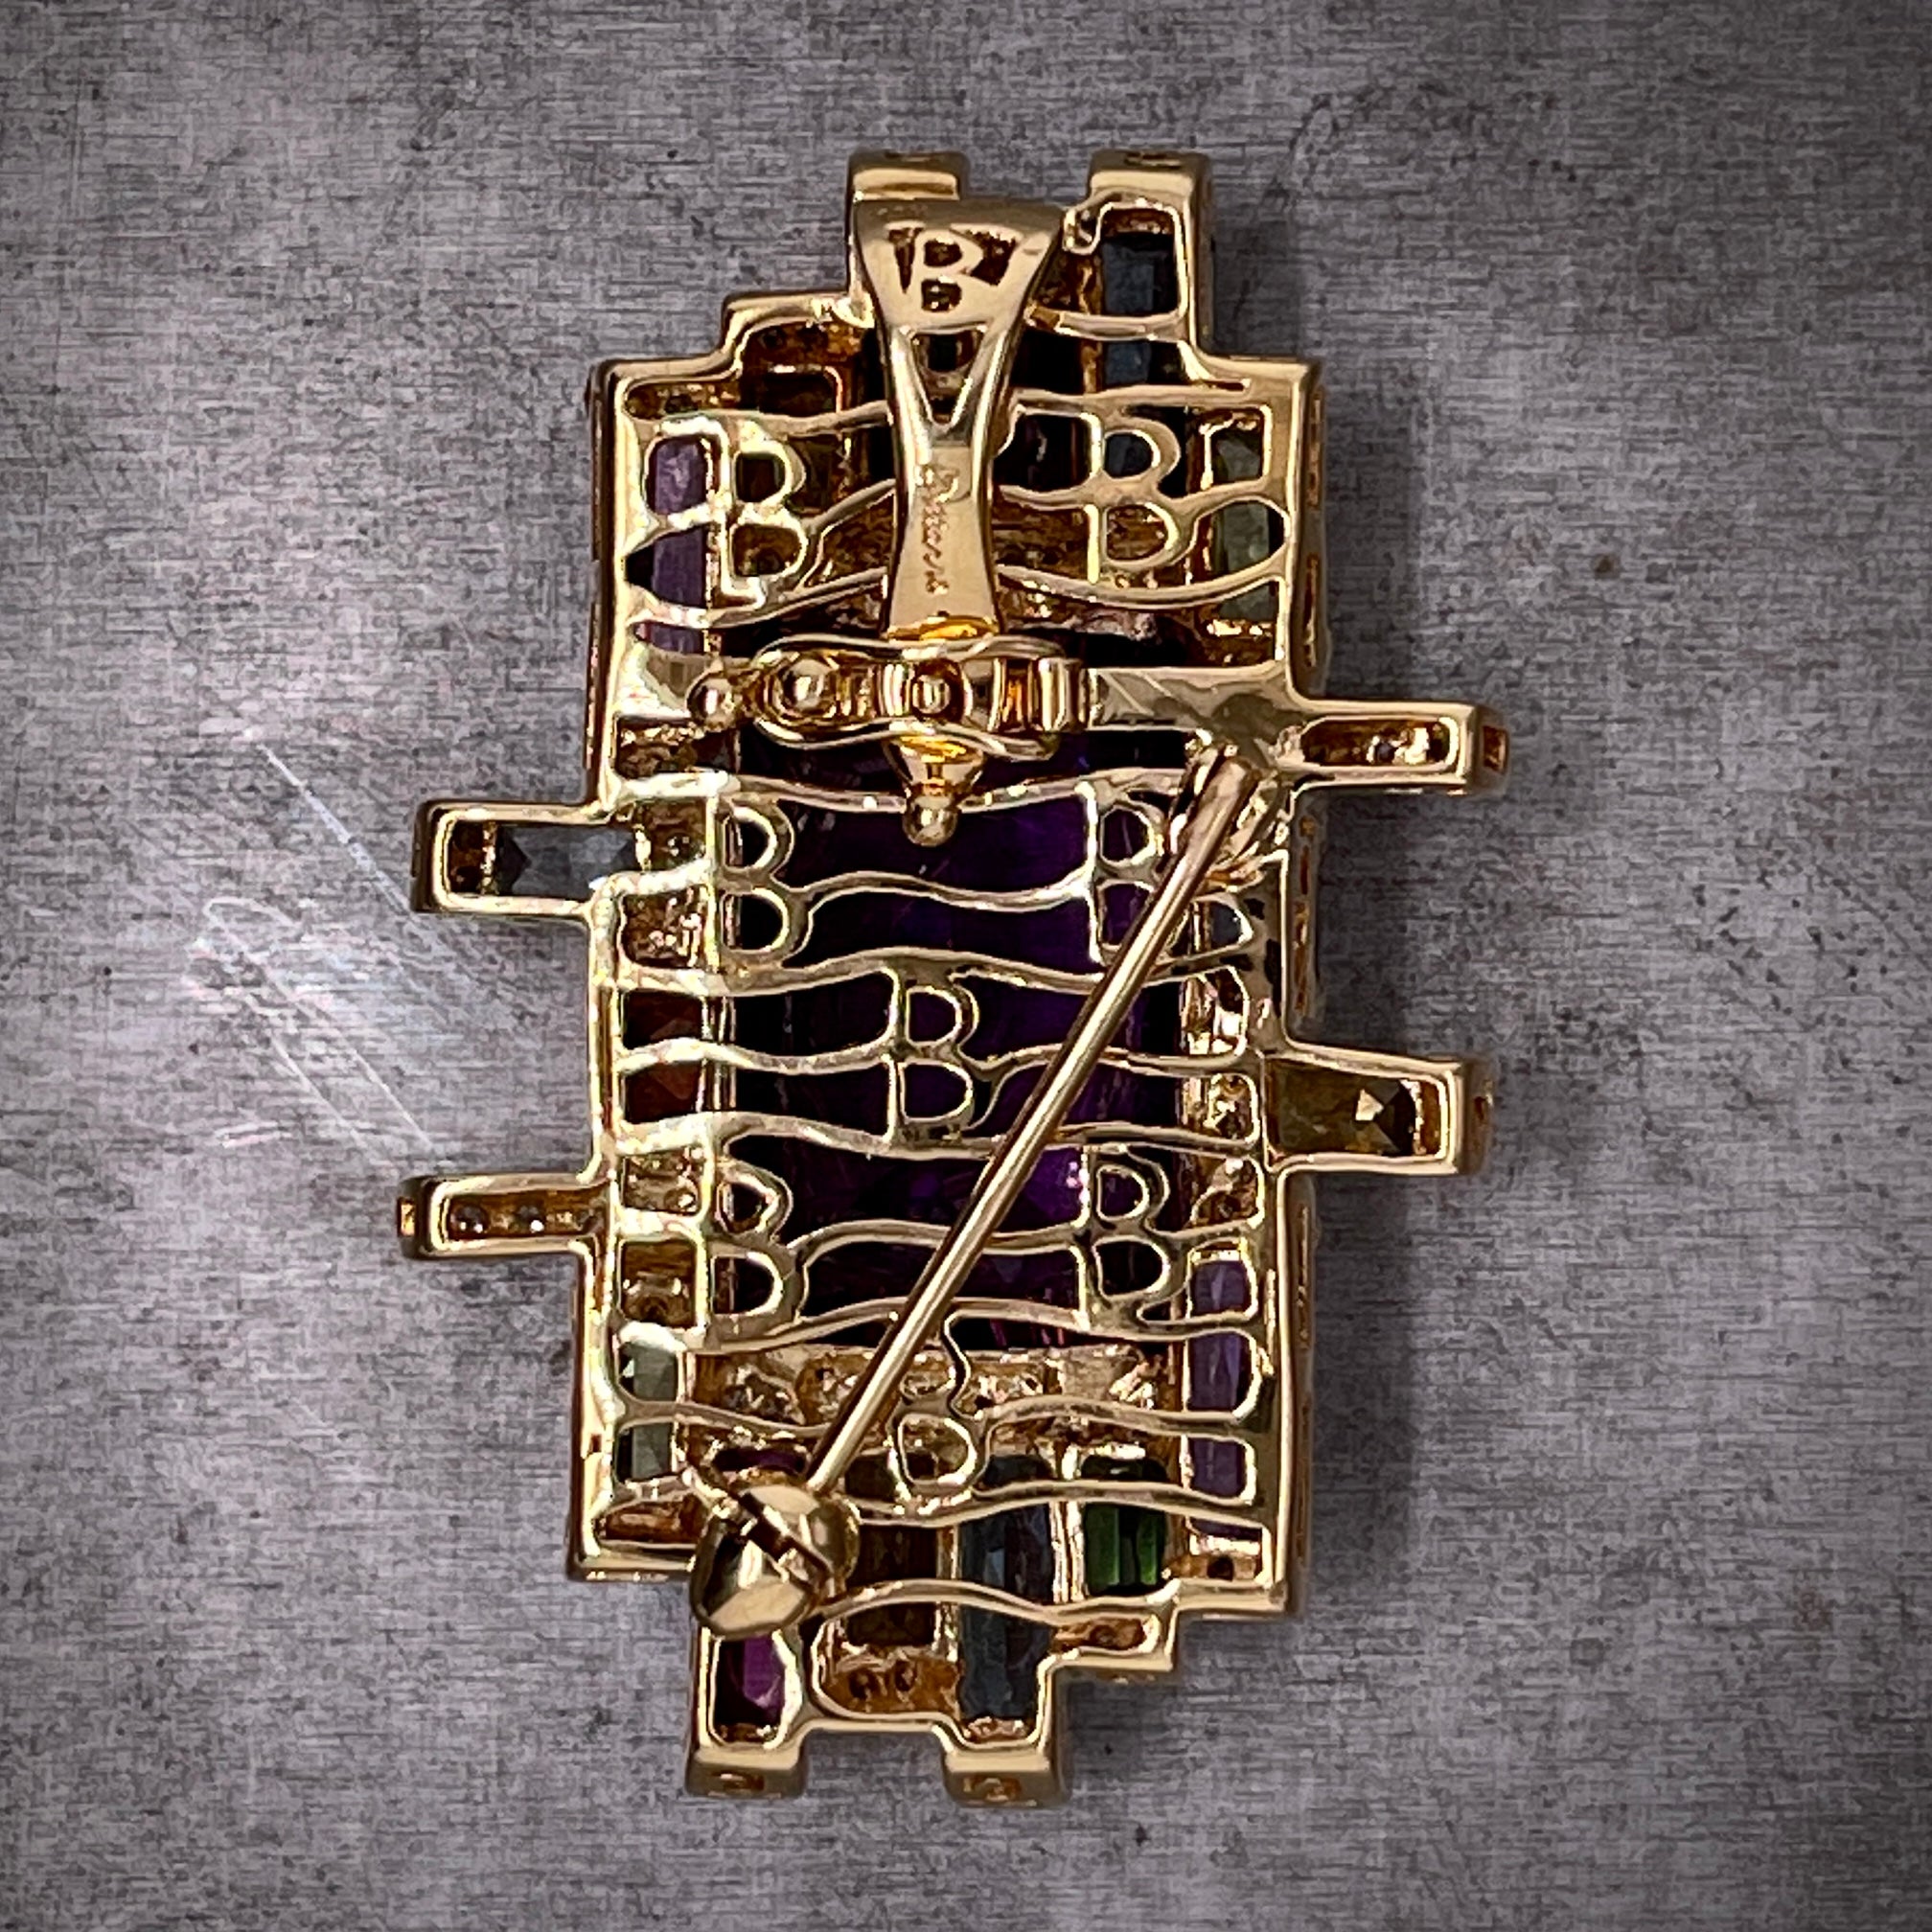 Full view of the back of the amethyst brooch. here you can see a decorative 18 karat yellow gold backing with a wavy design throughout it. There is a pin that expands from the middle right side to the bottom left. The hidden hinged bail is located at the top of the broochs' back.